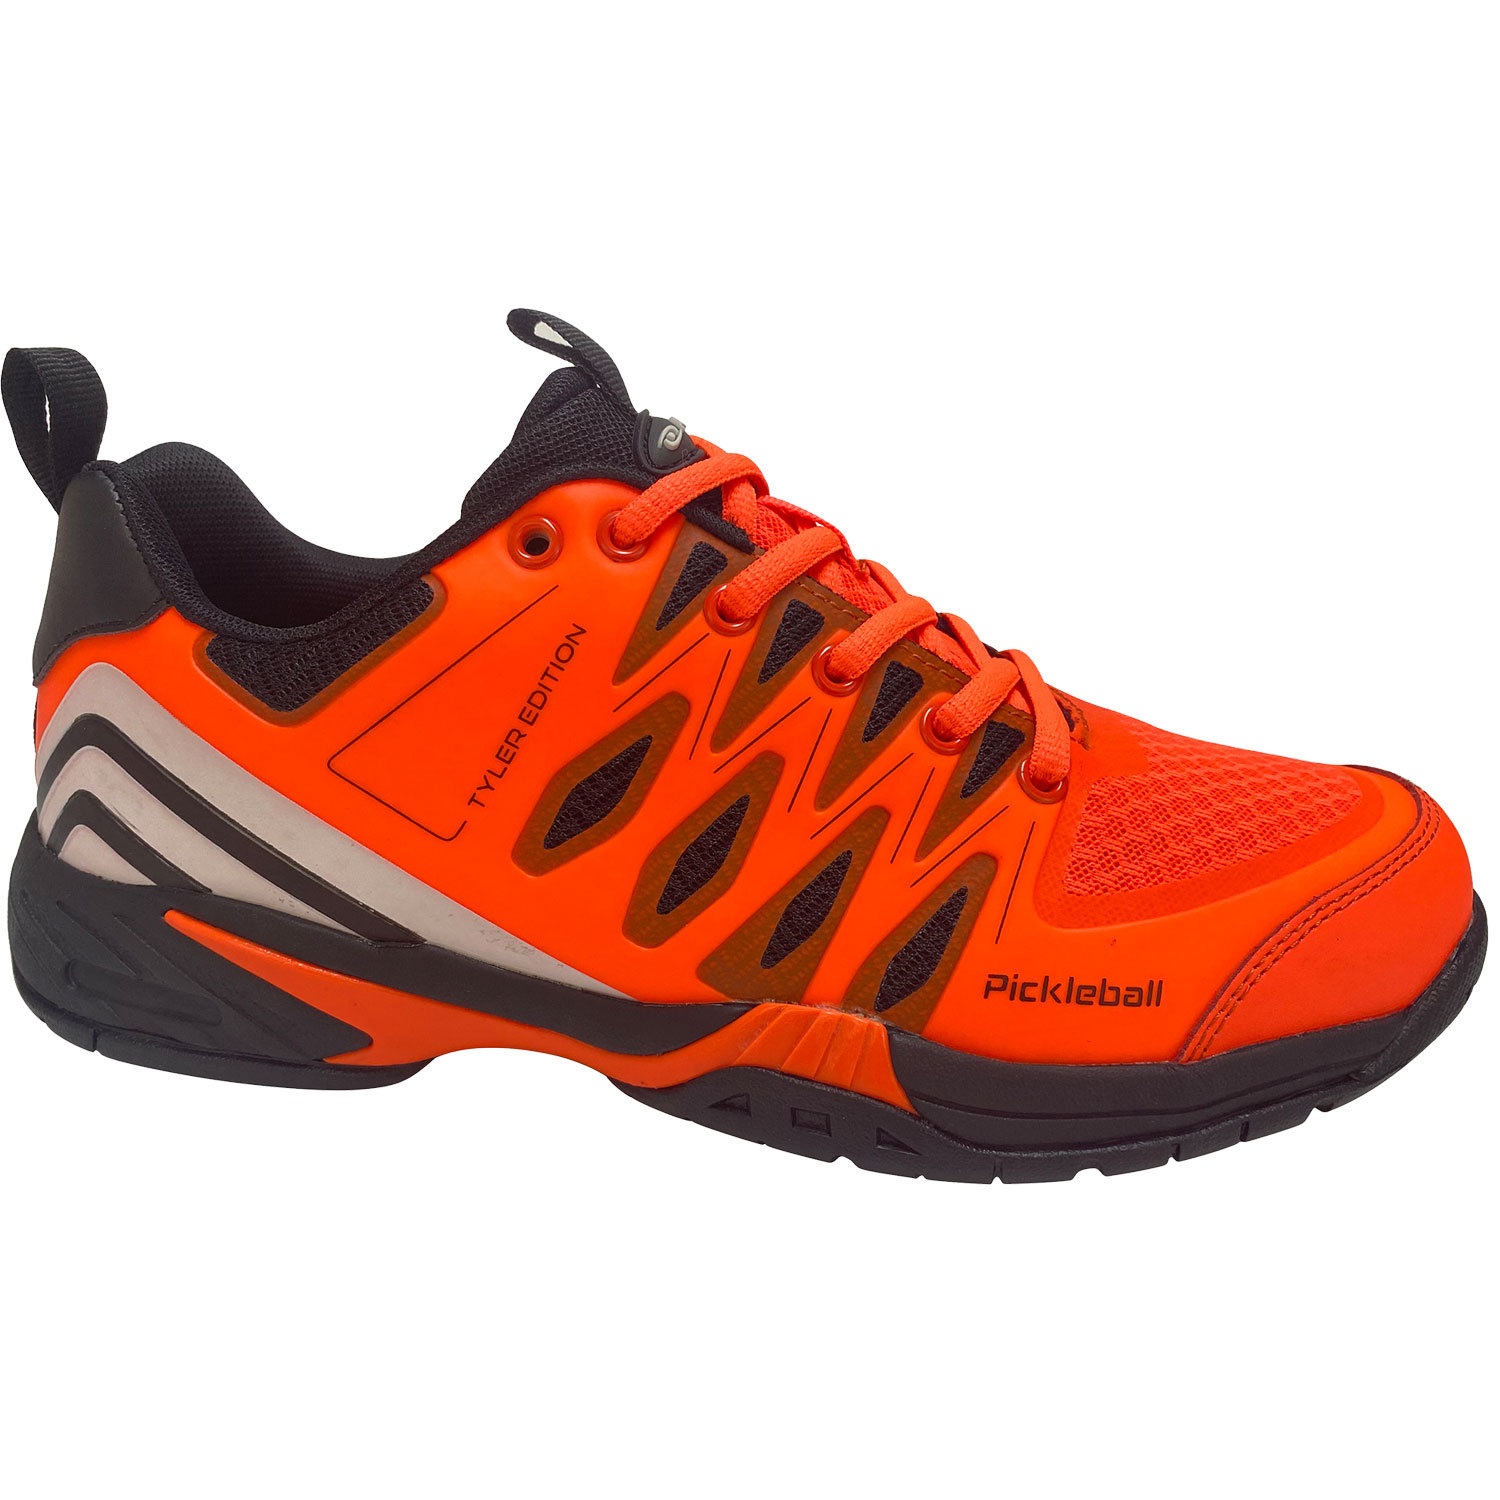 Tyler Loong signature pro pickleball shoe from Acacia